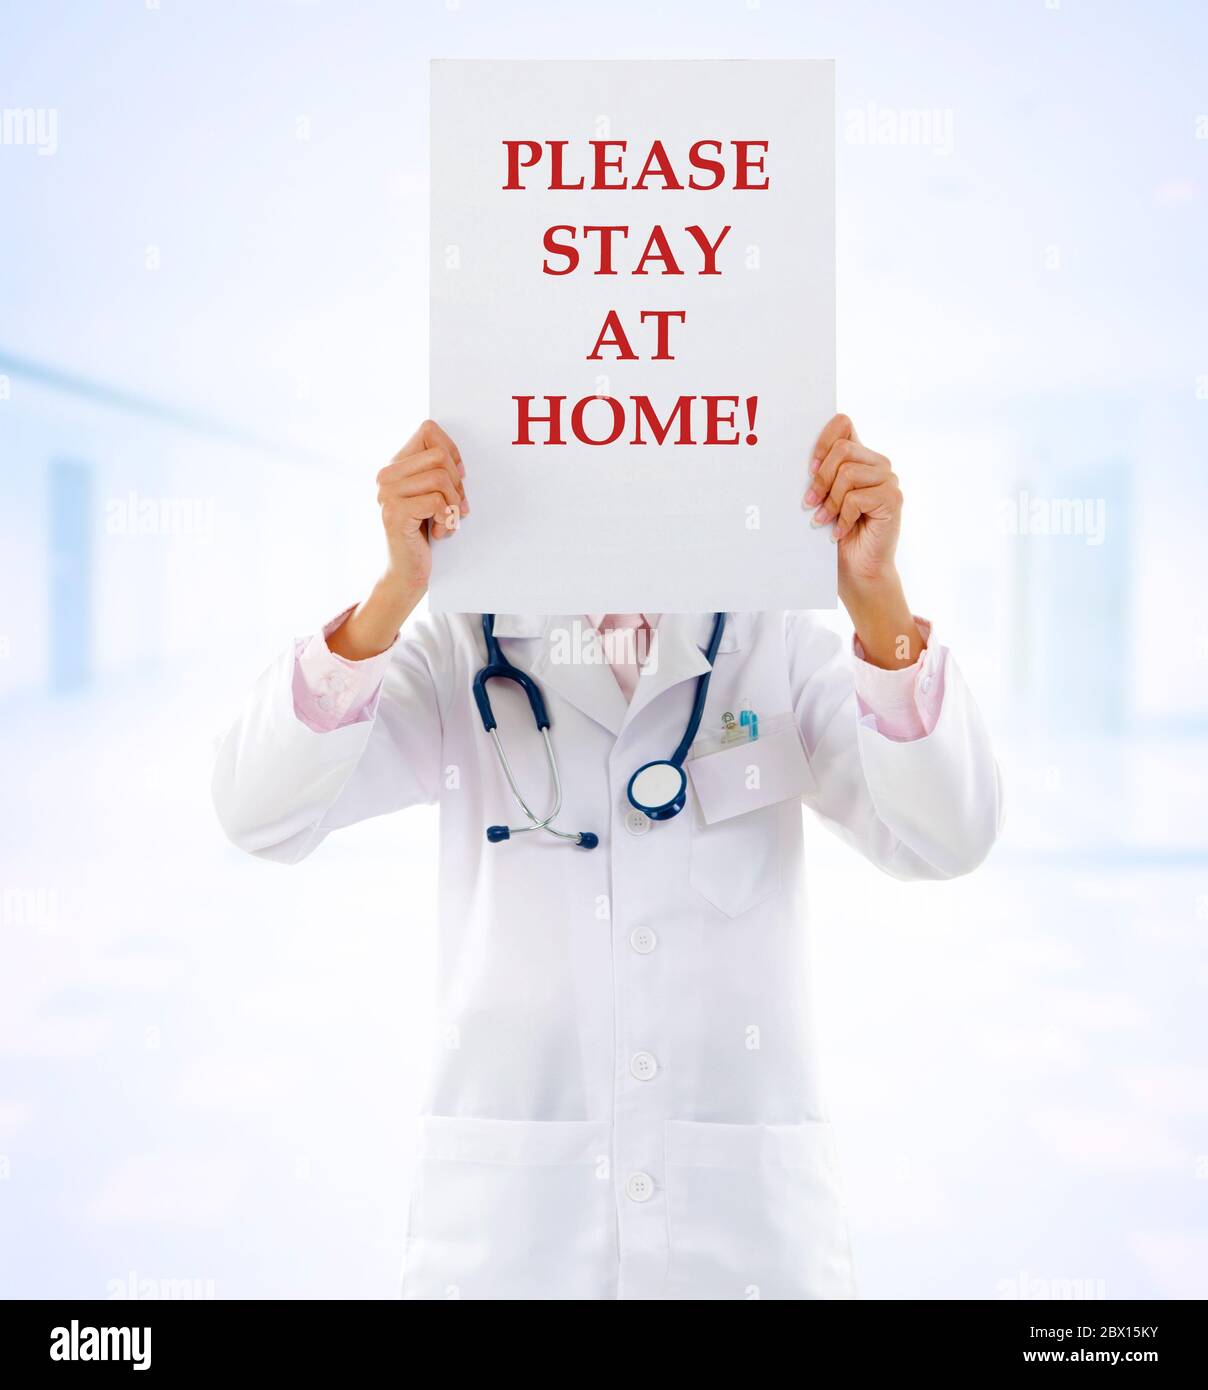 Medical staff holding a card with stay at home on it. Stock Photo